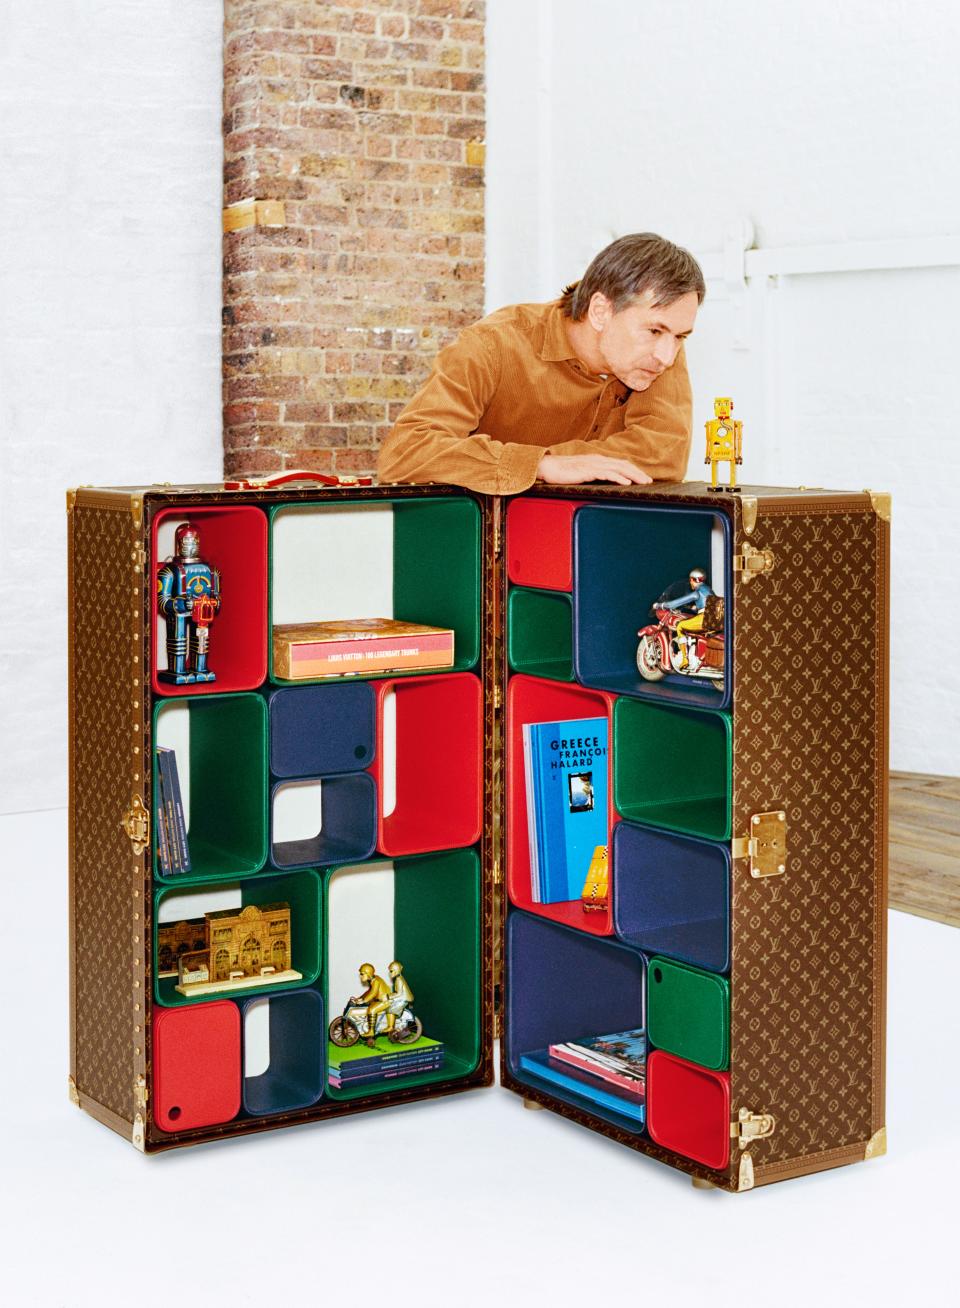 The Cabinet of Curiosities, designed by Marc Newsom